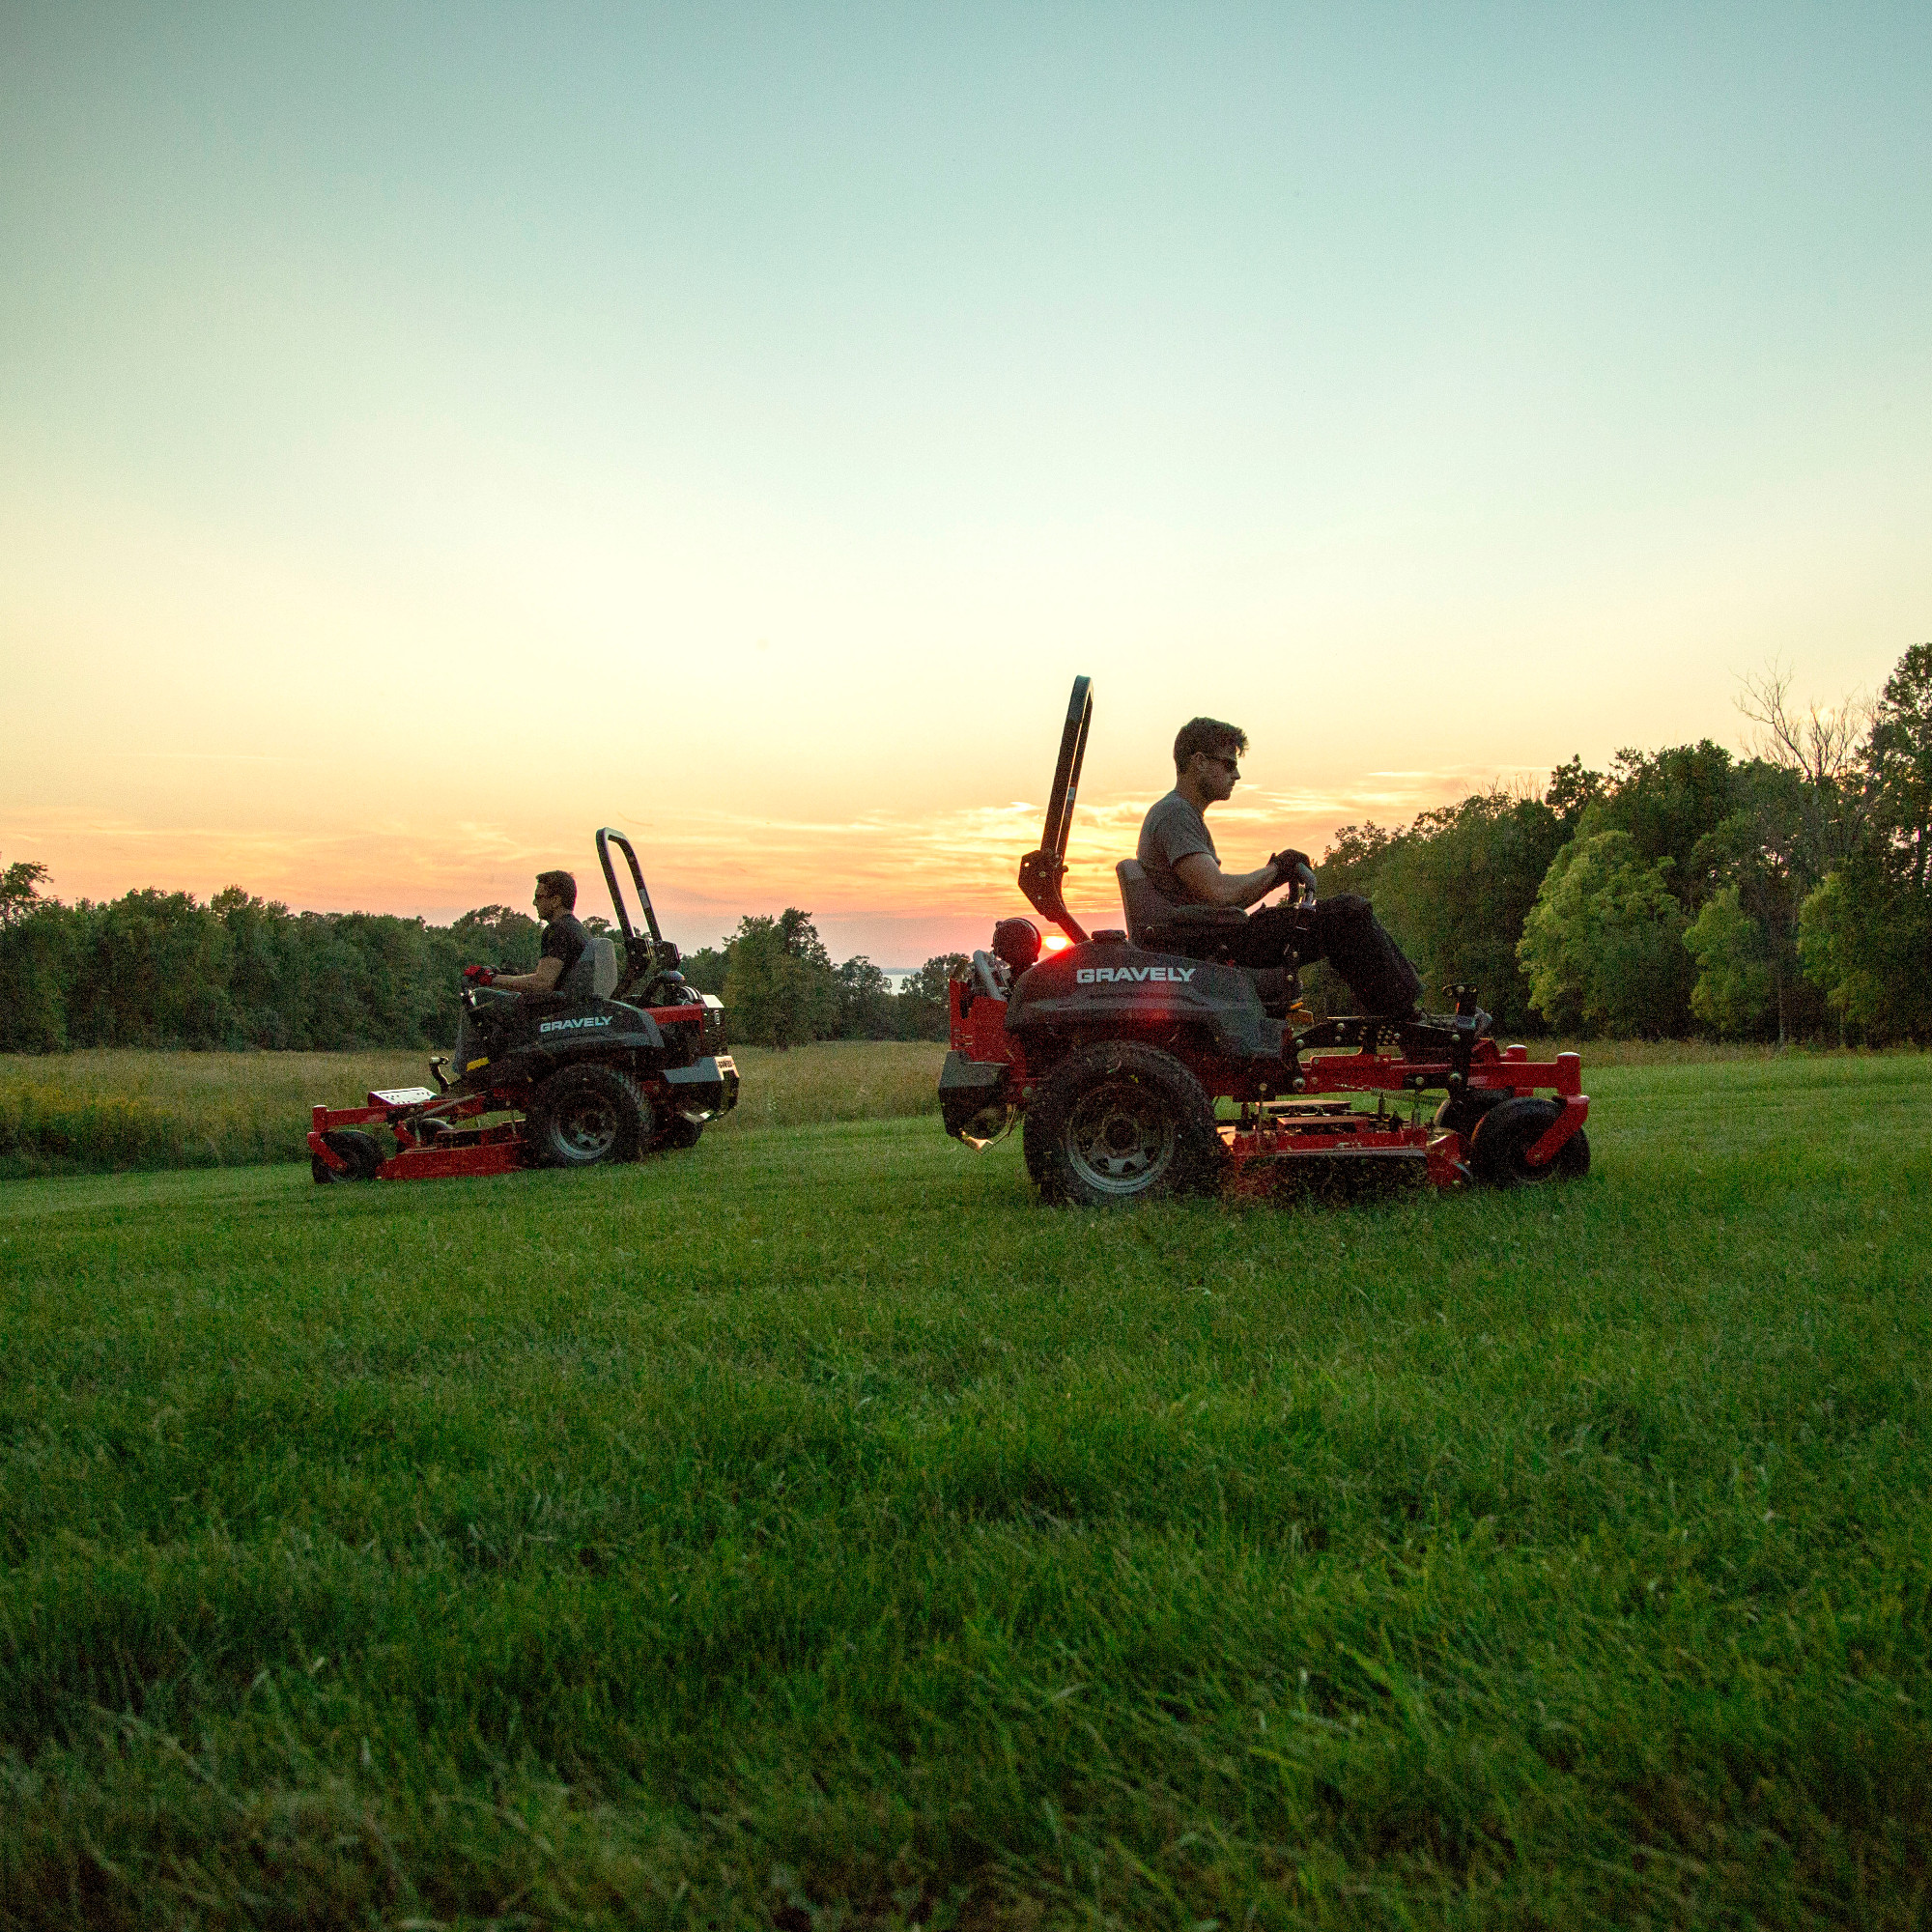 New Product Development Gravely Lawn Mowers